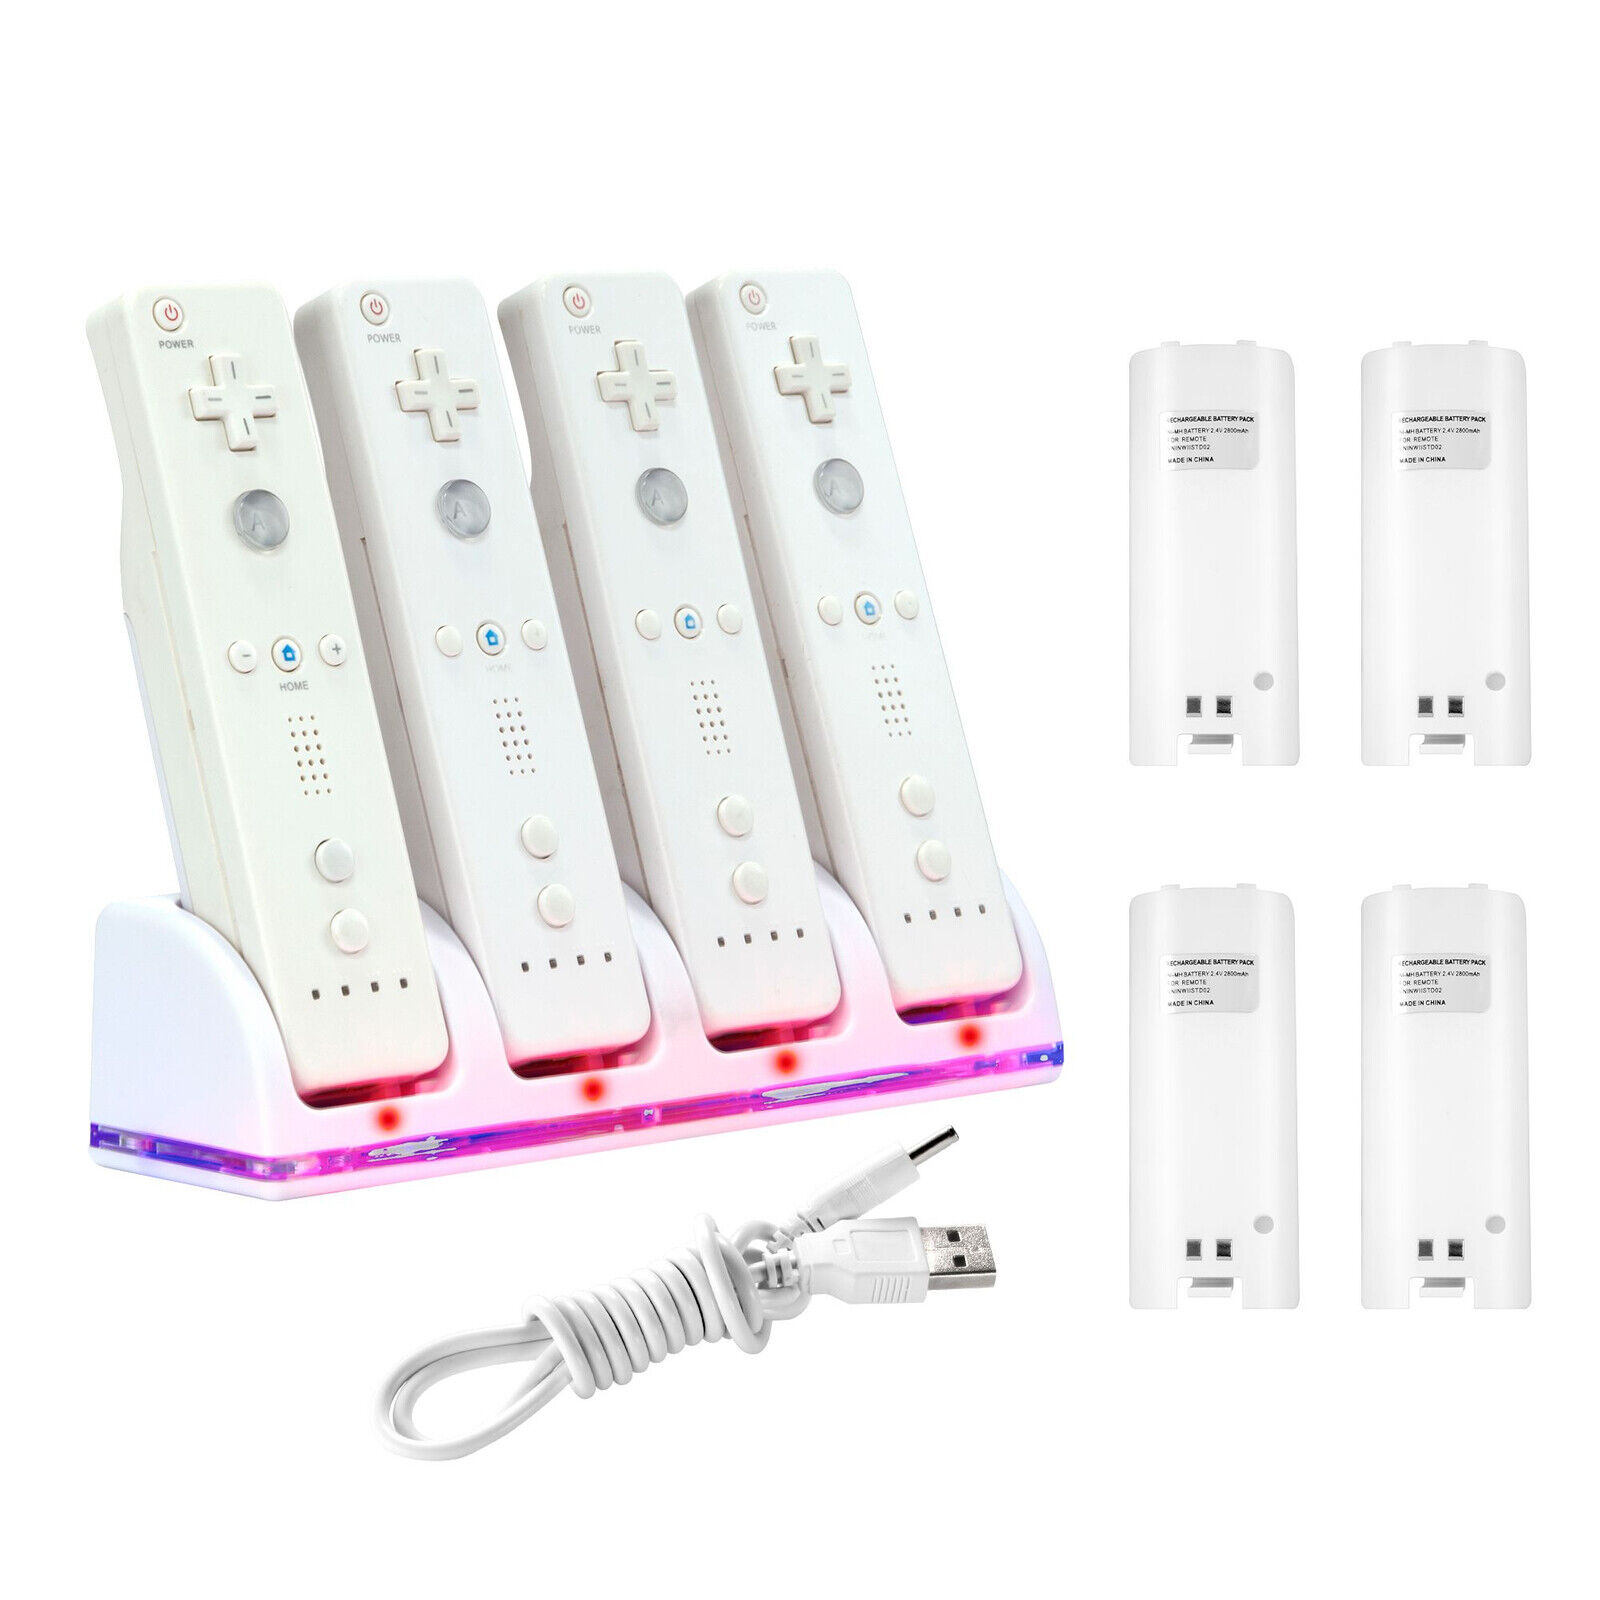 4x Rechargeable Batteries Pack + Charger Dock For Nintendo Wii Remote Controller